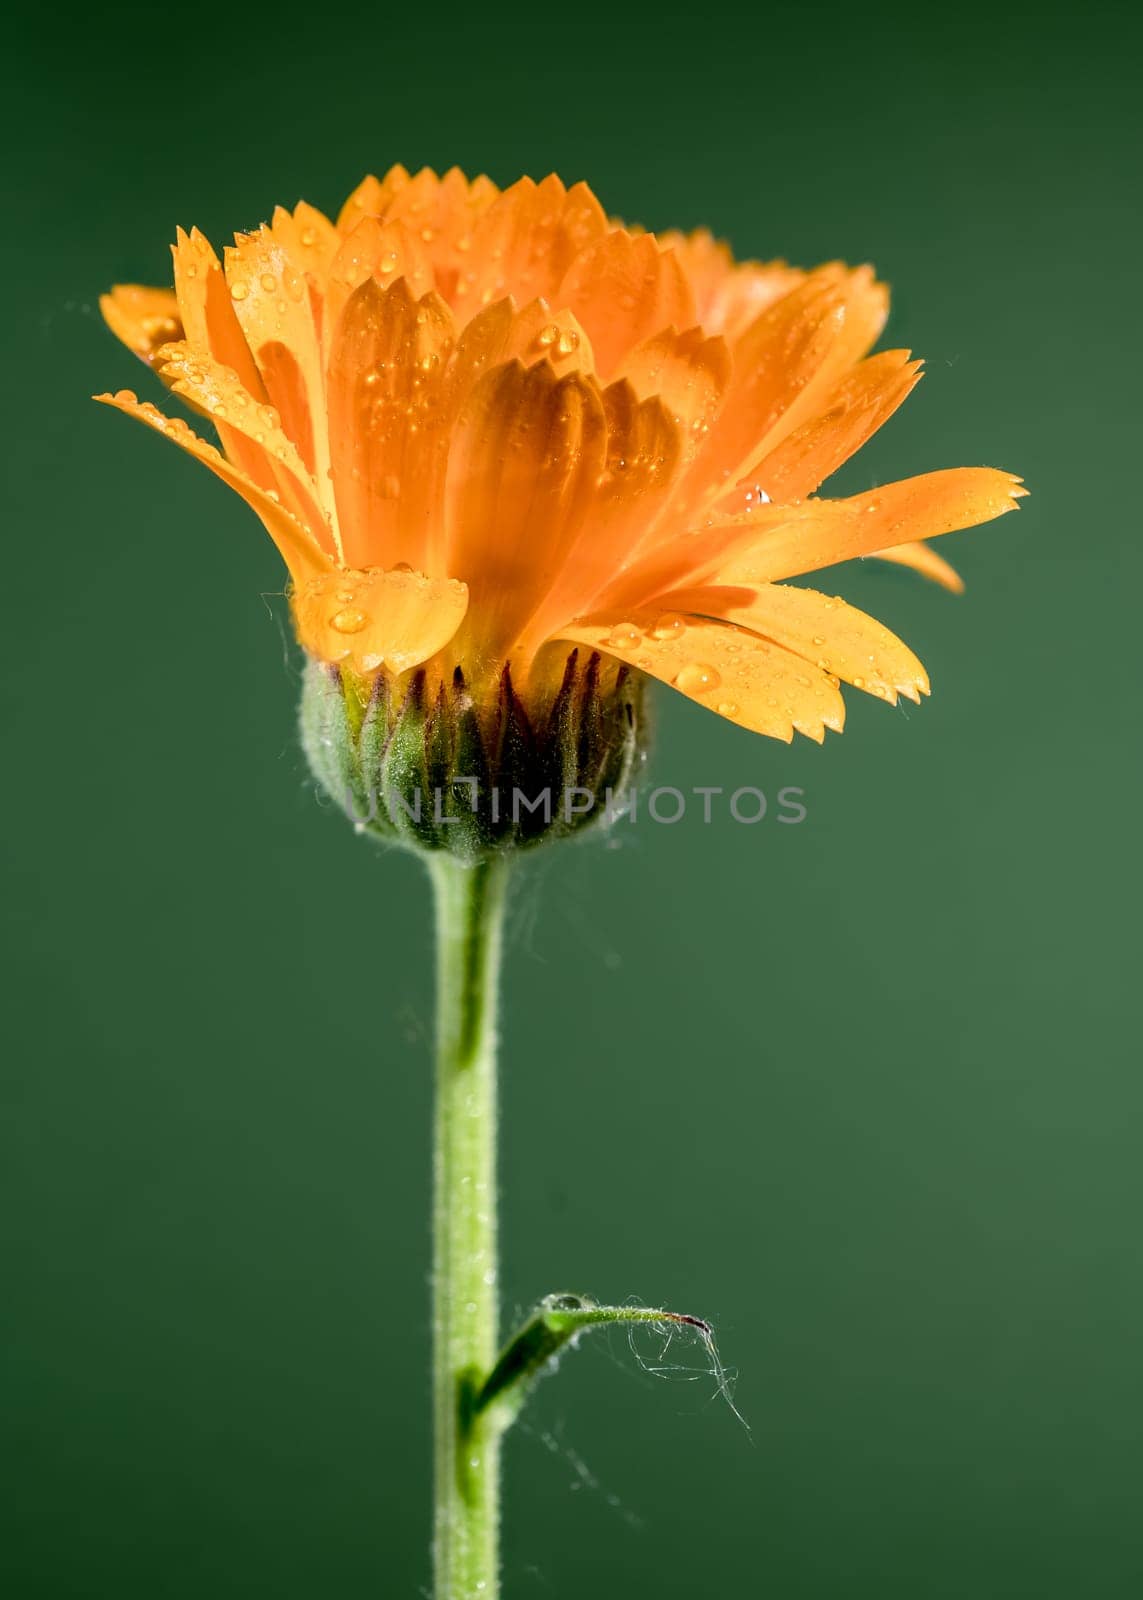 Beautiful Blooming Calendula officinalis flowers on a green background. Flower head close-up.